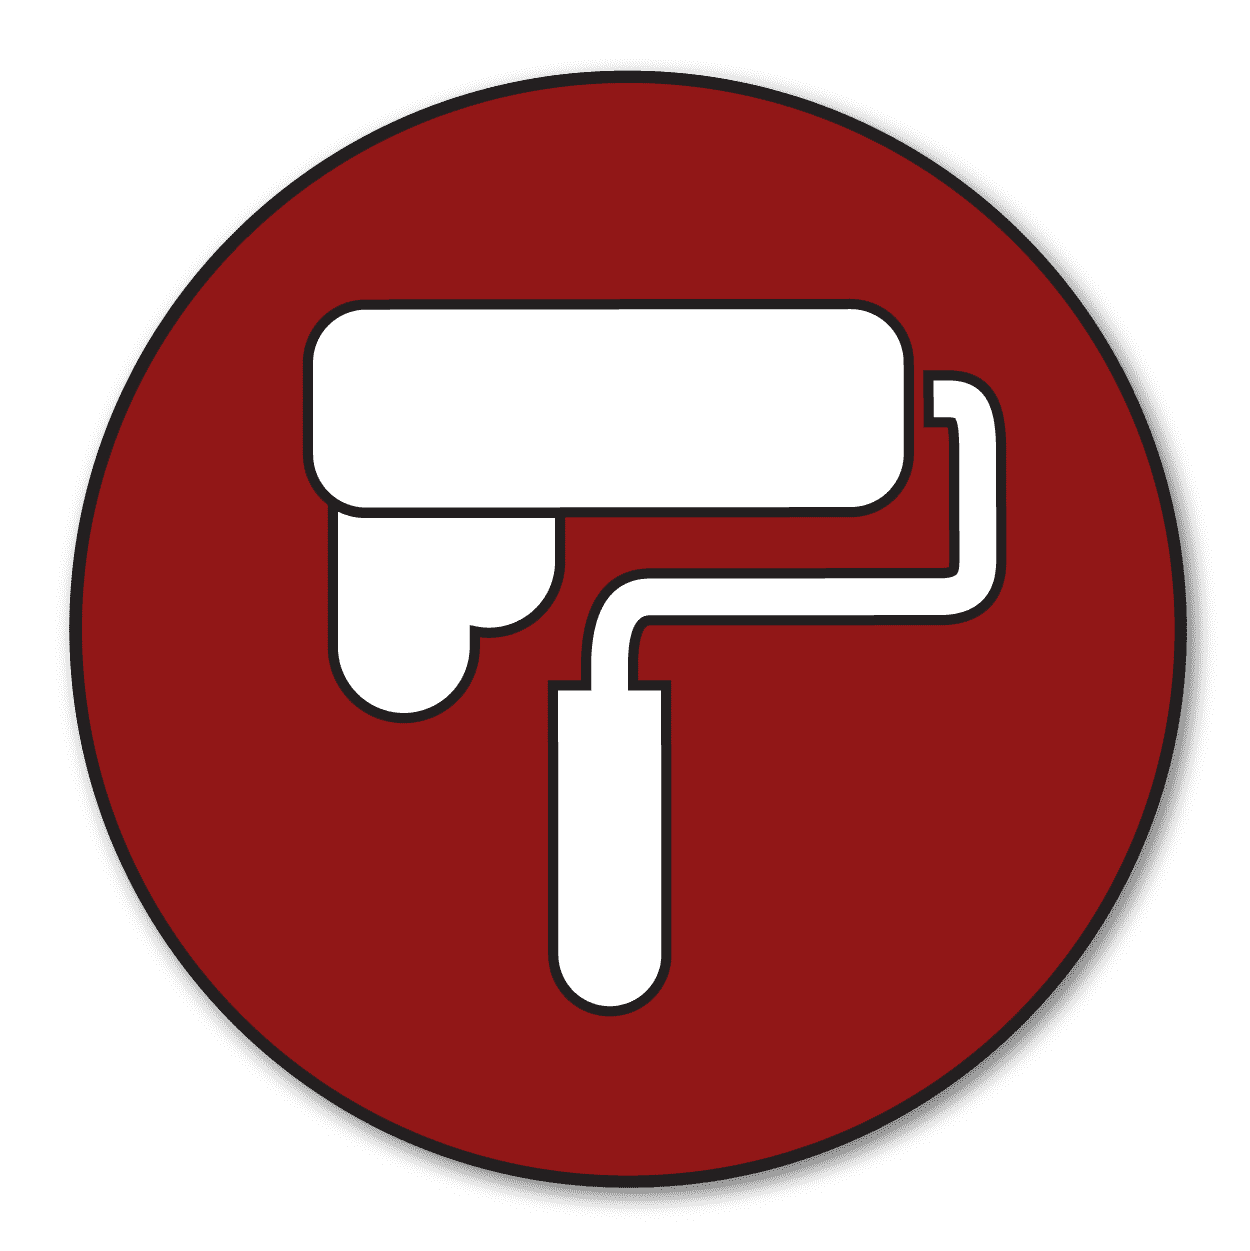 paint roller icon with paint dripping